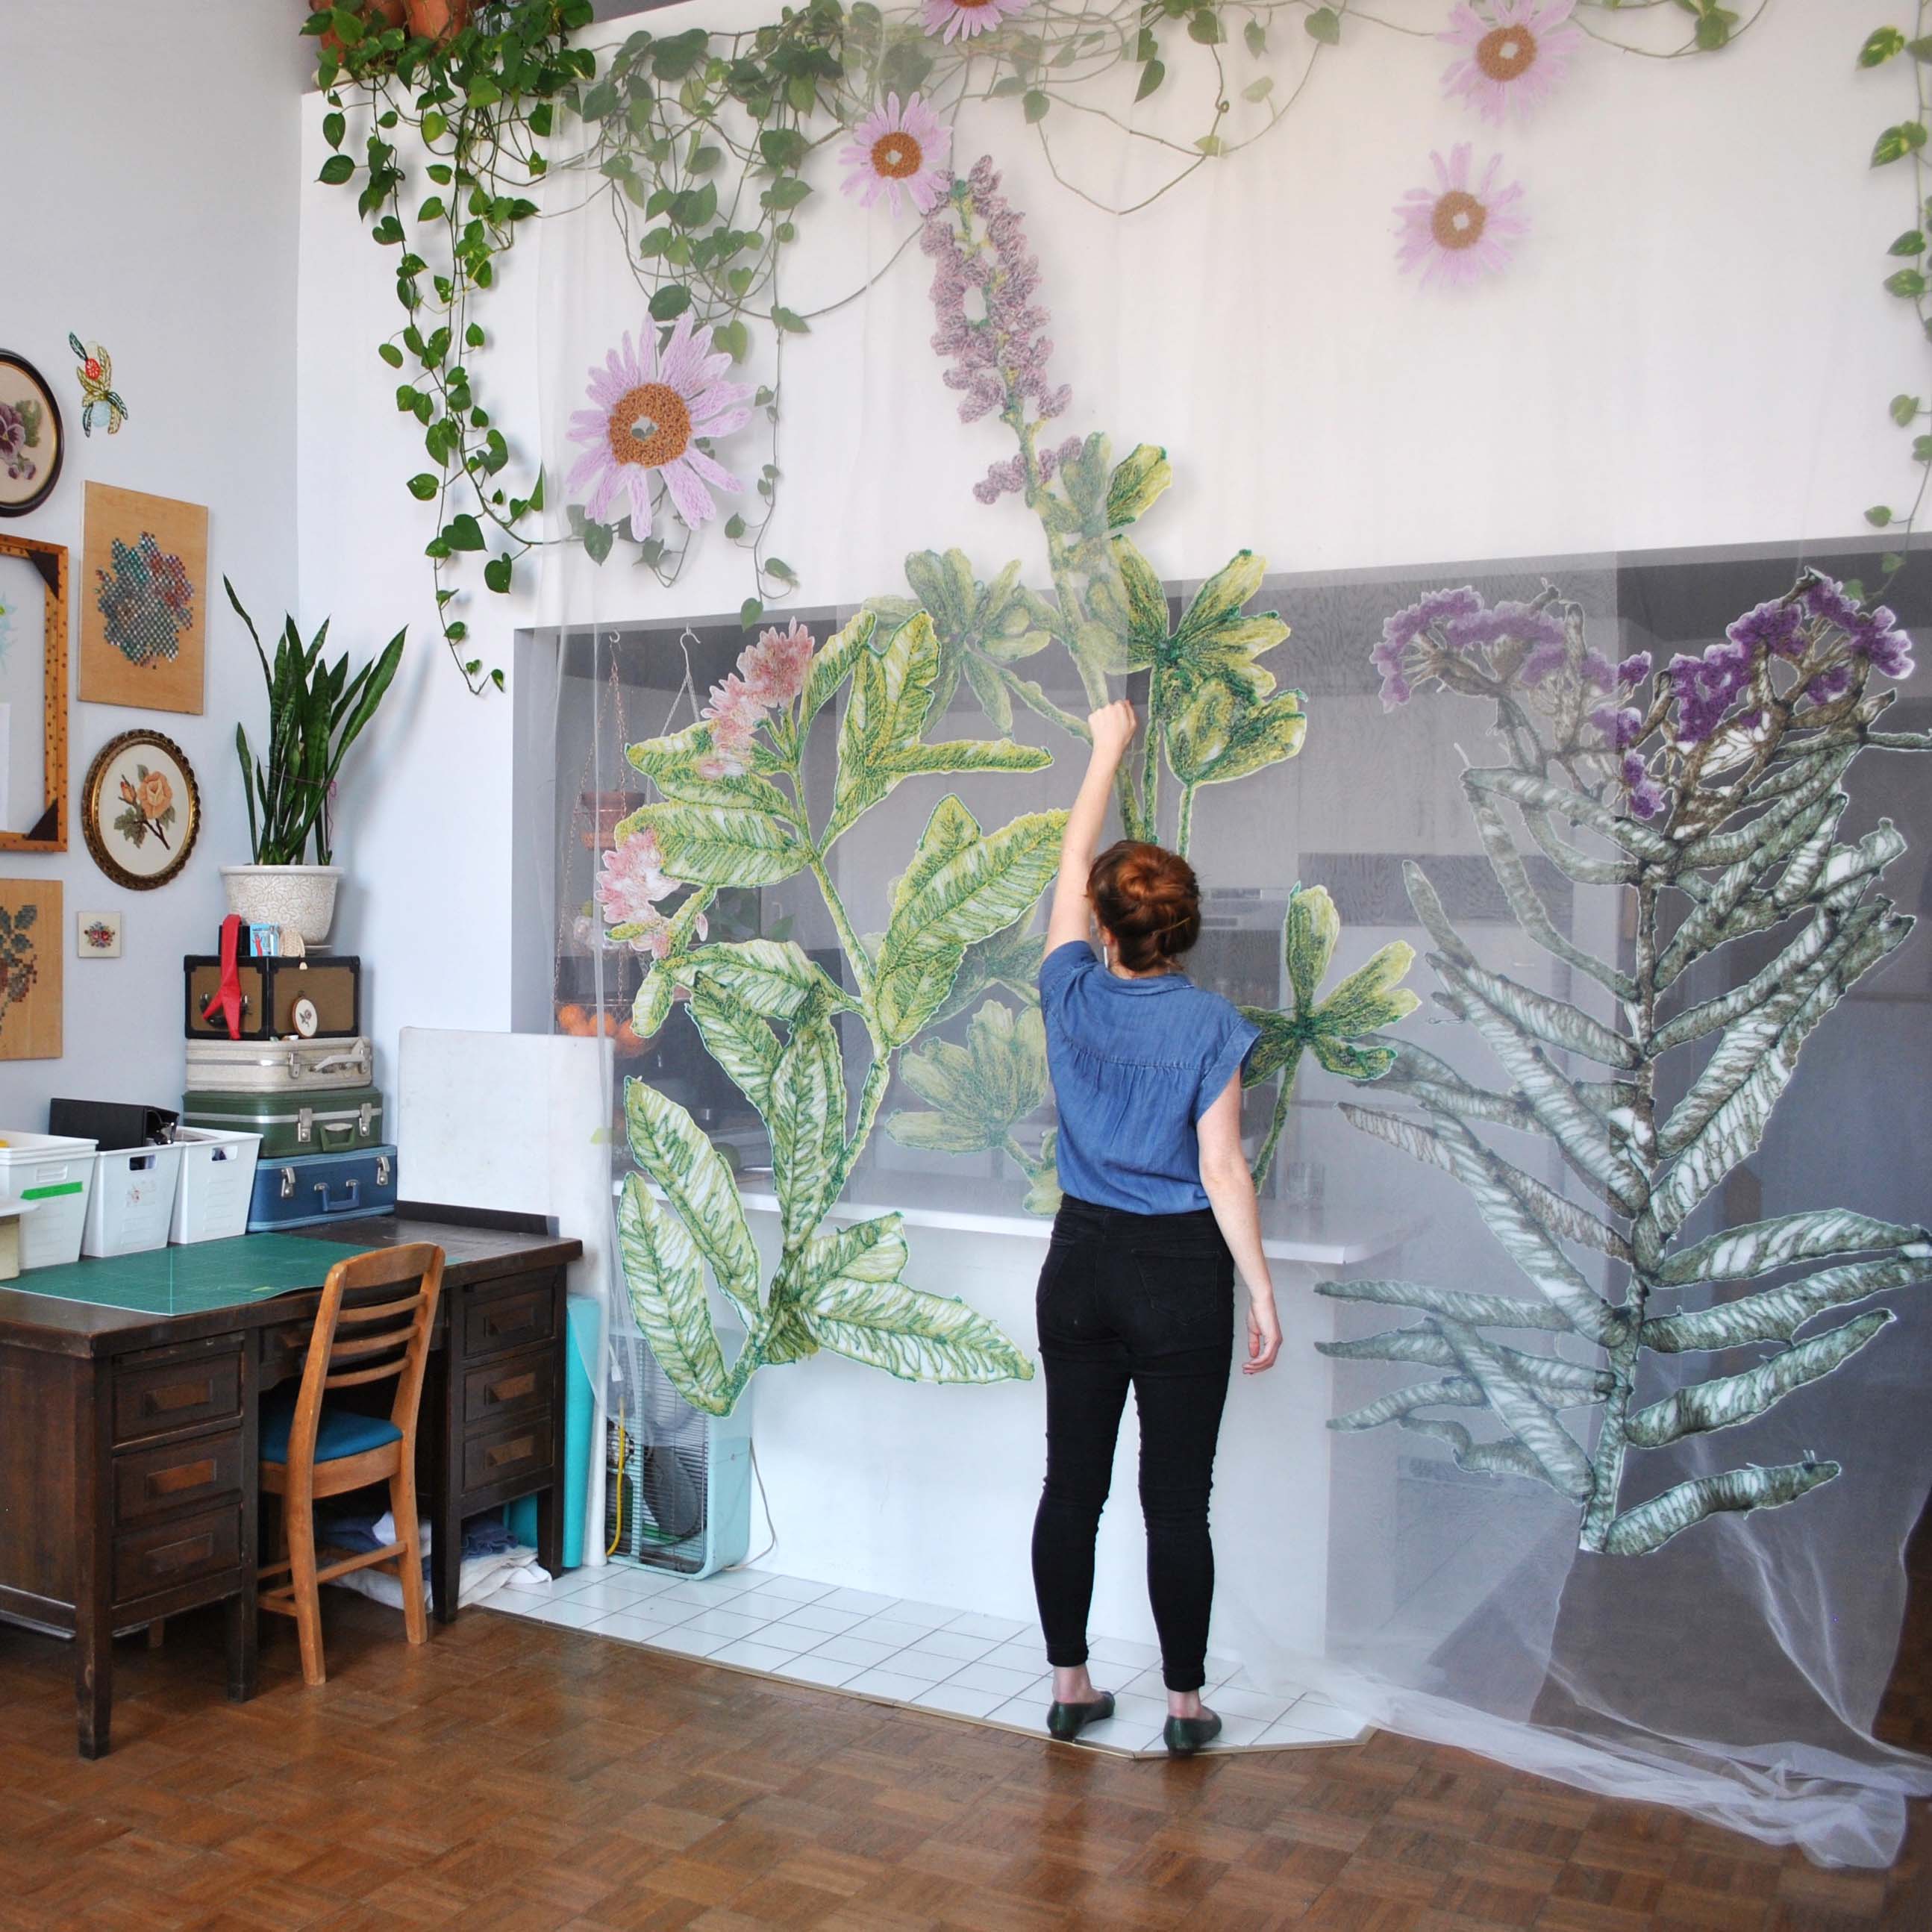 A person standing inside an apartment working on an art project involving large sketches of plants